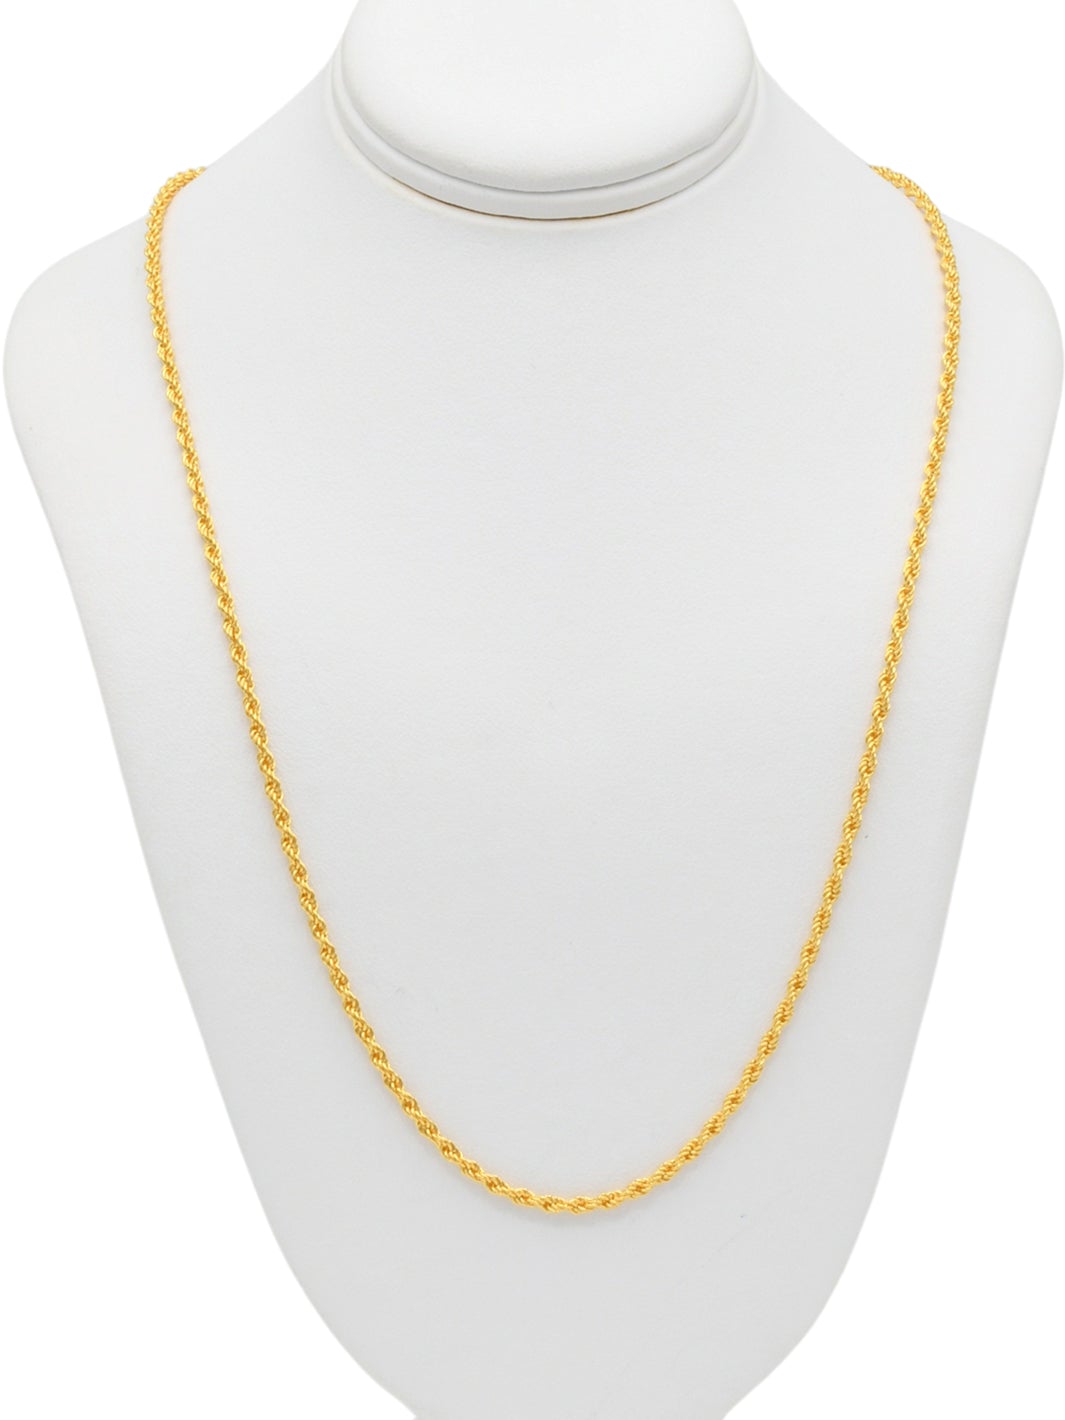 22ct Gold Hollow Rope Chain - 50cm - Roop Darshan